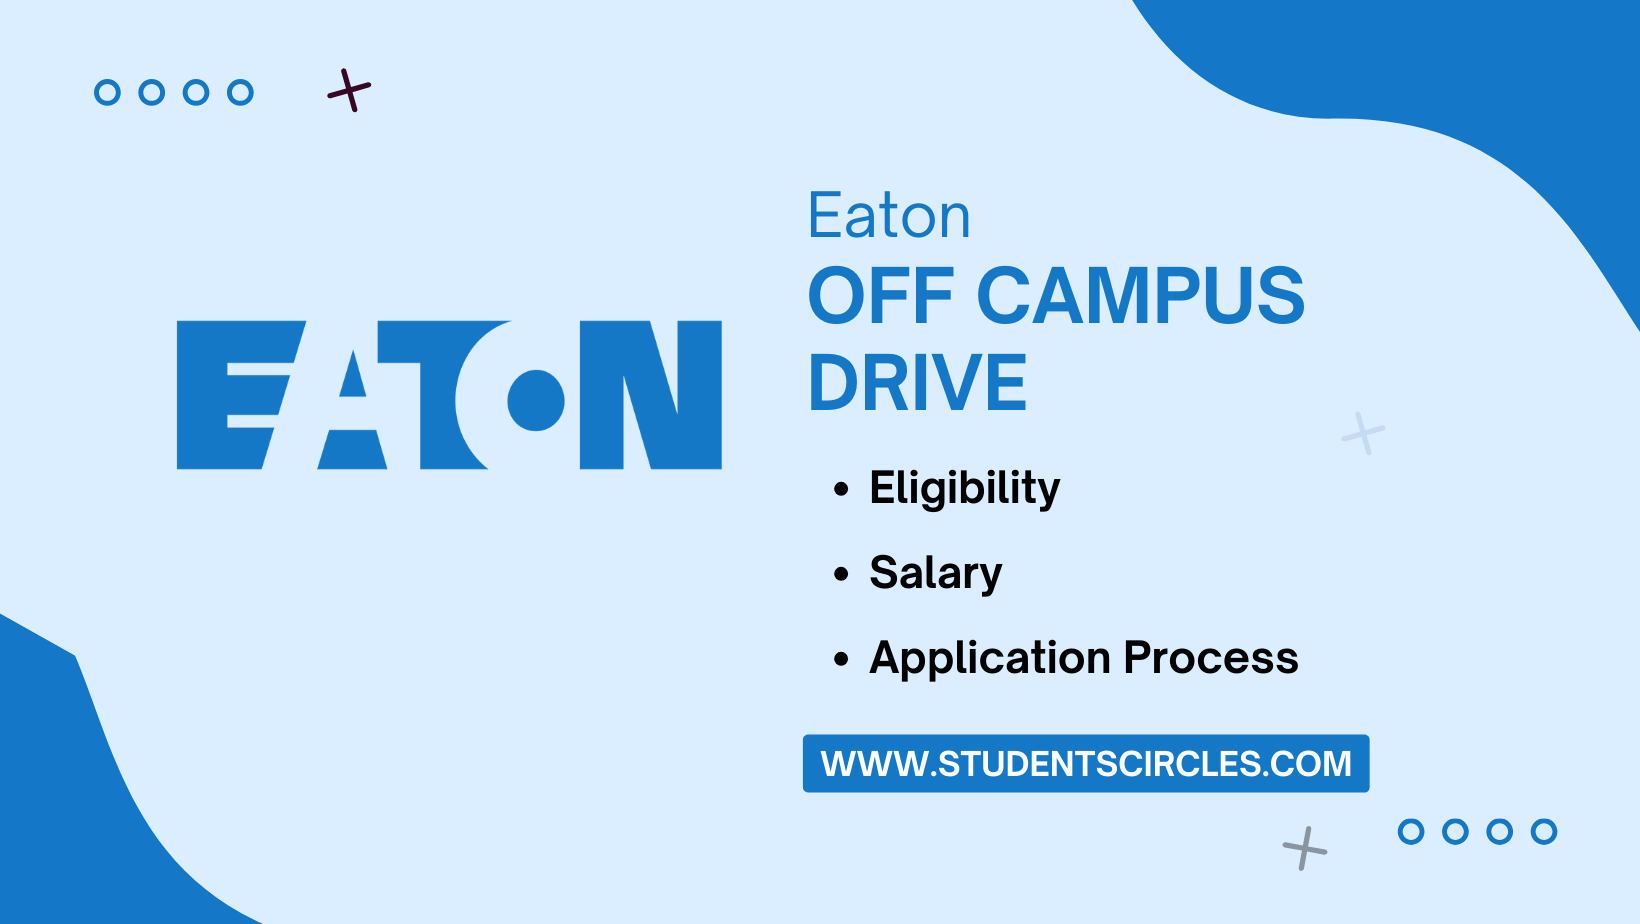 Eaton Off Campus Drive